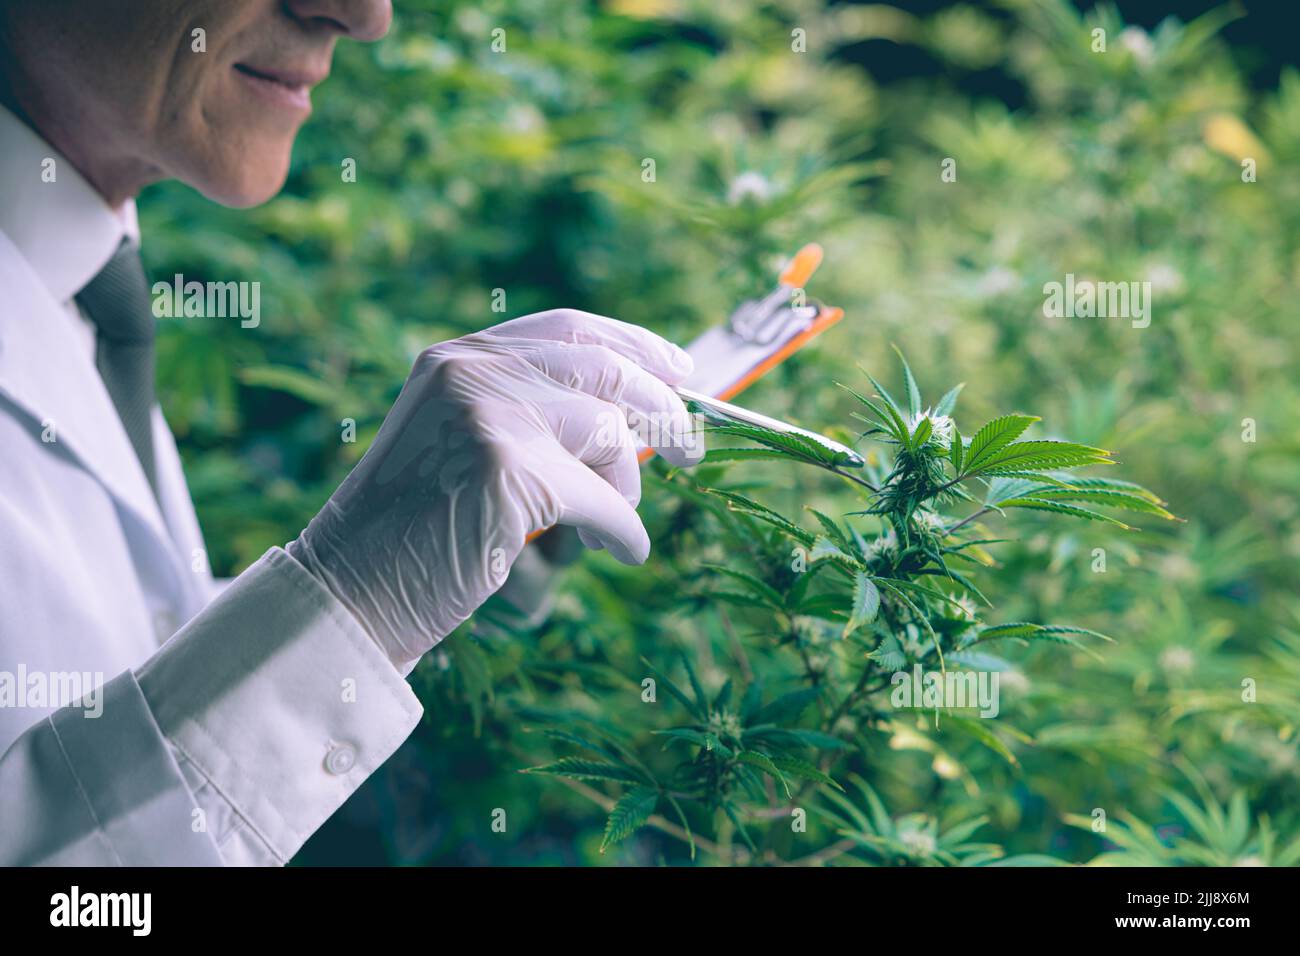 Cannabis Sativa or Cannabis Indica medical plant farming agriculture with scientist working hemp flower bud research for medicine. Stock Photo